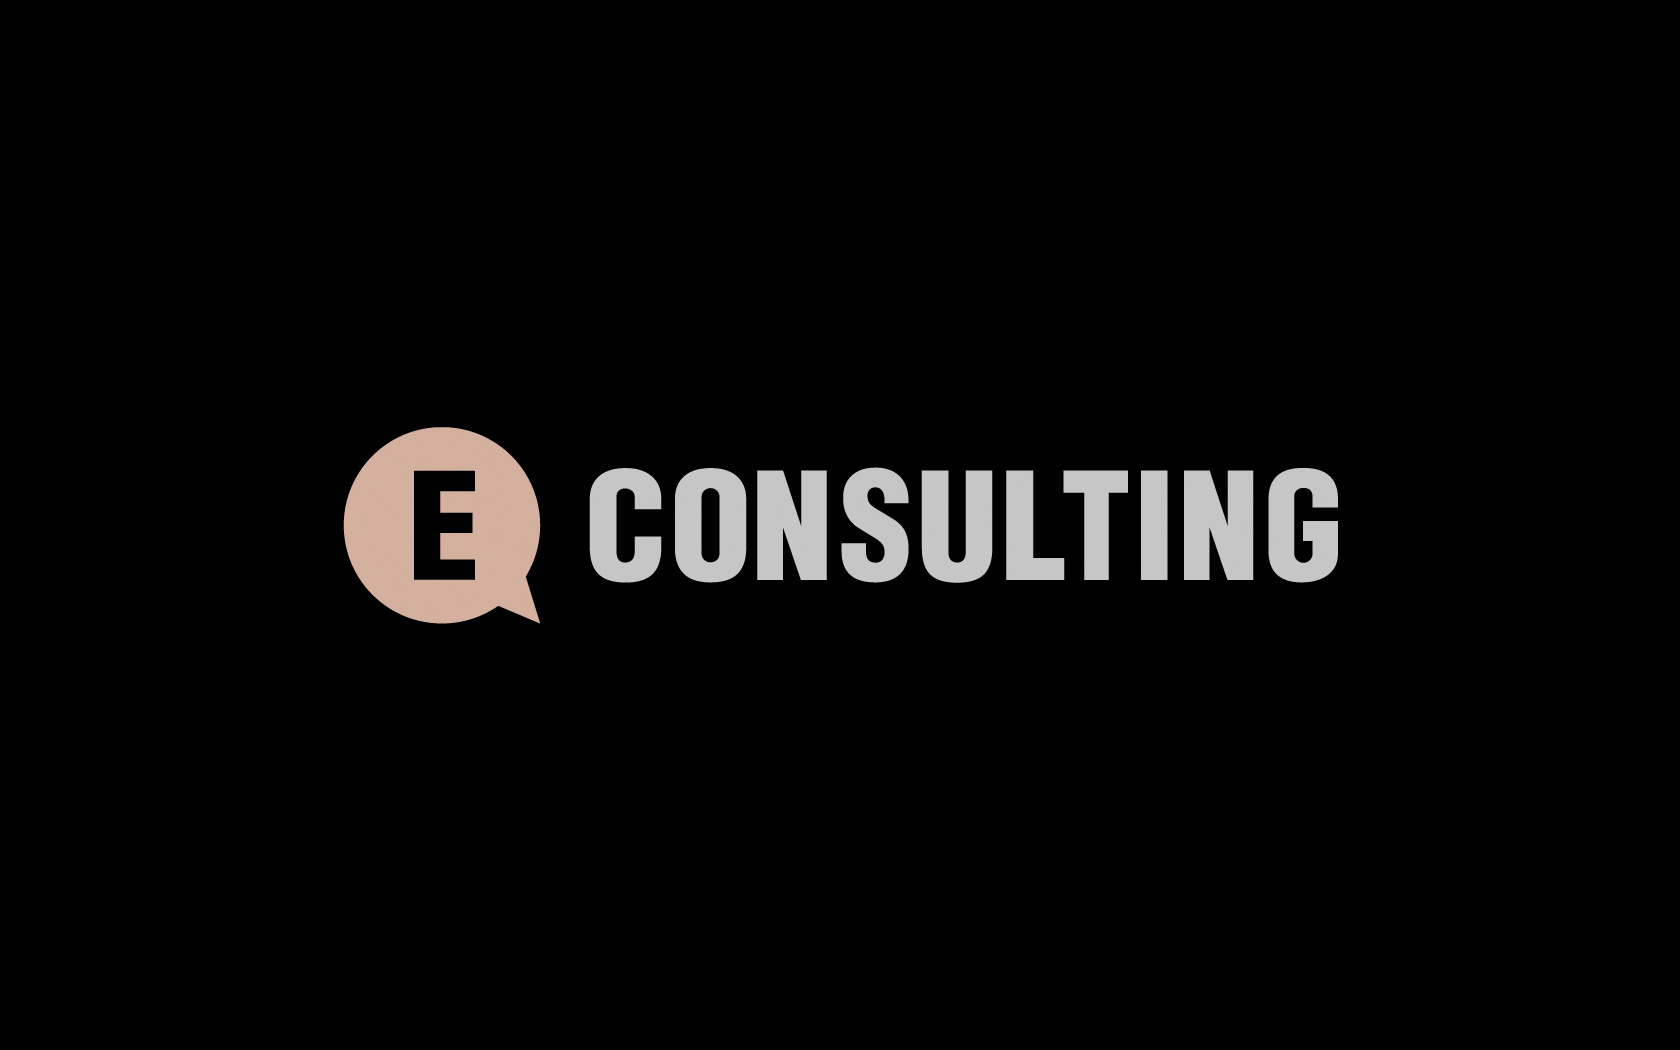 Econsulting